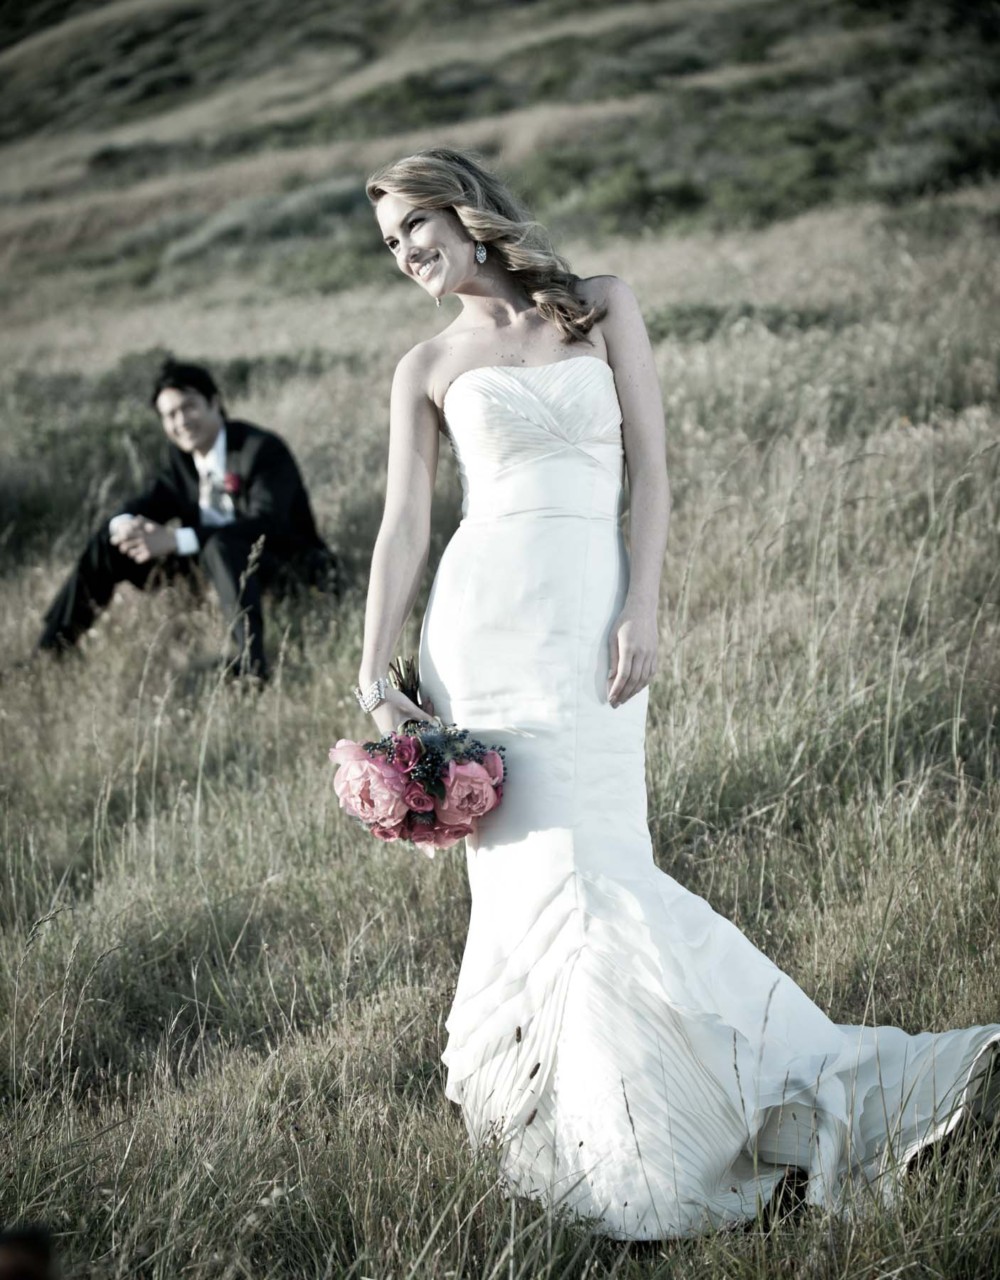 Looking for a fall wedding photographer in Chugiak?